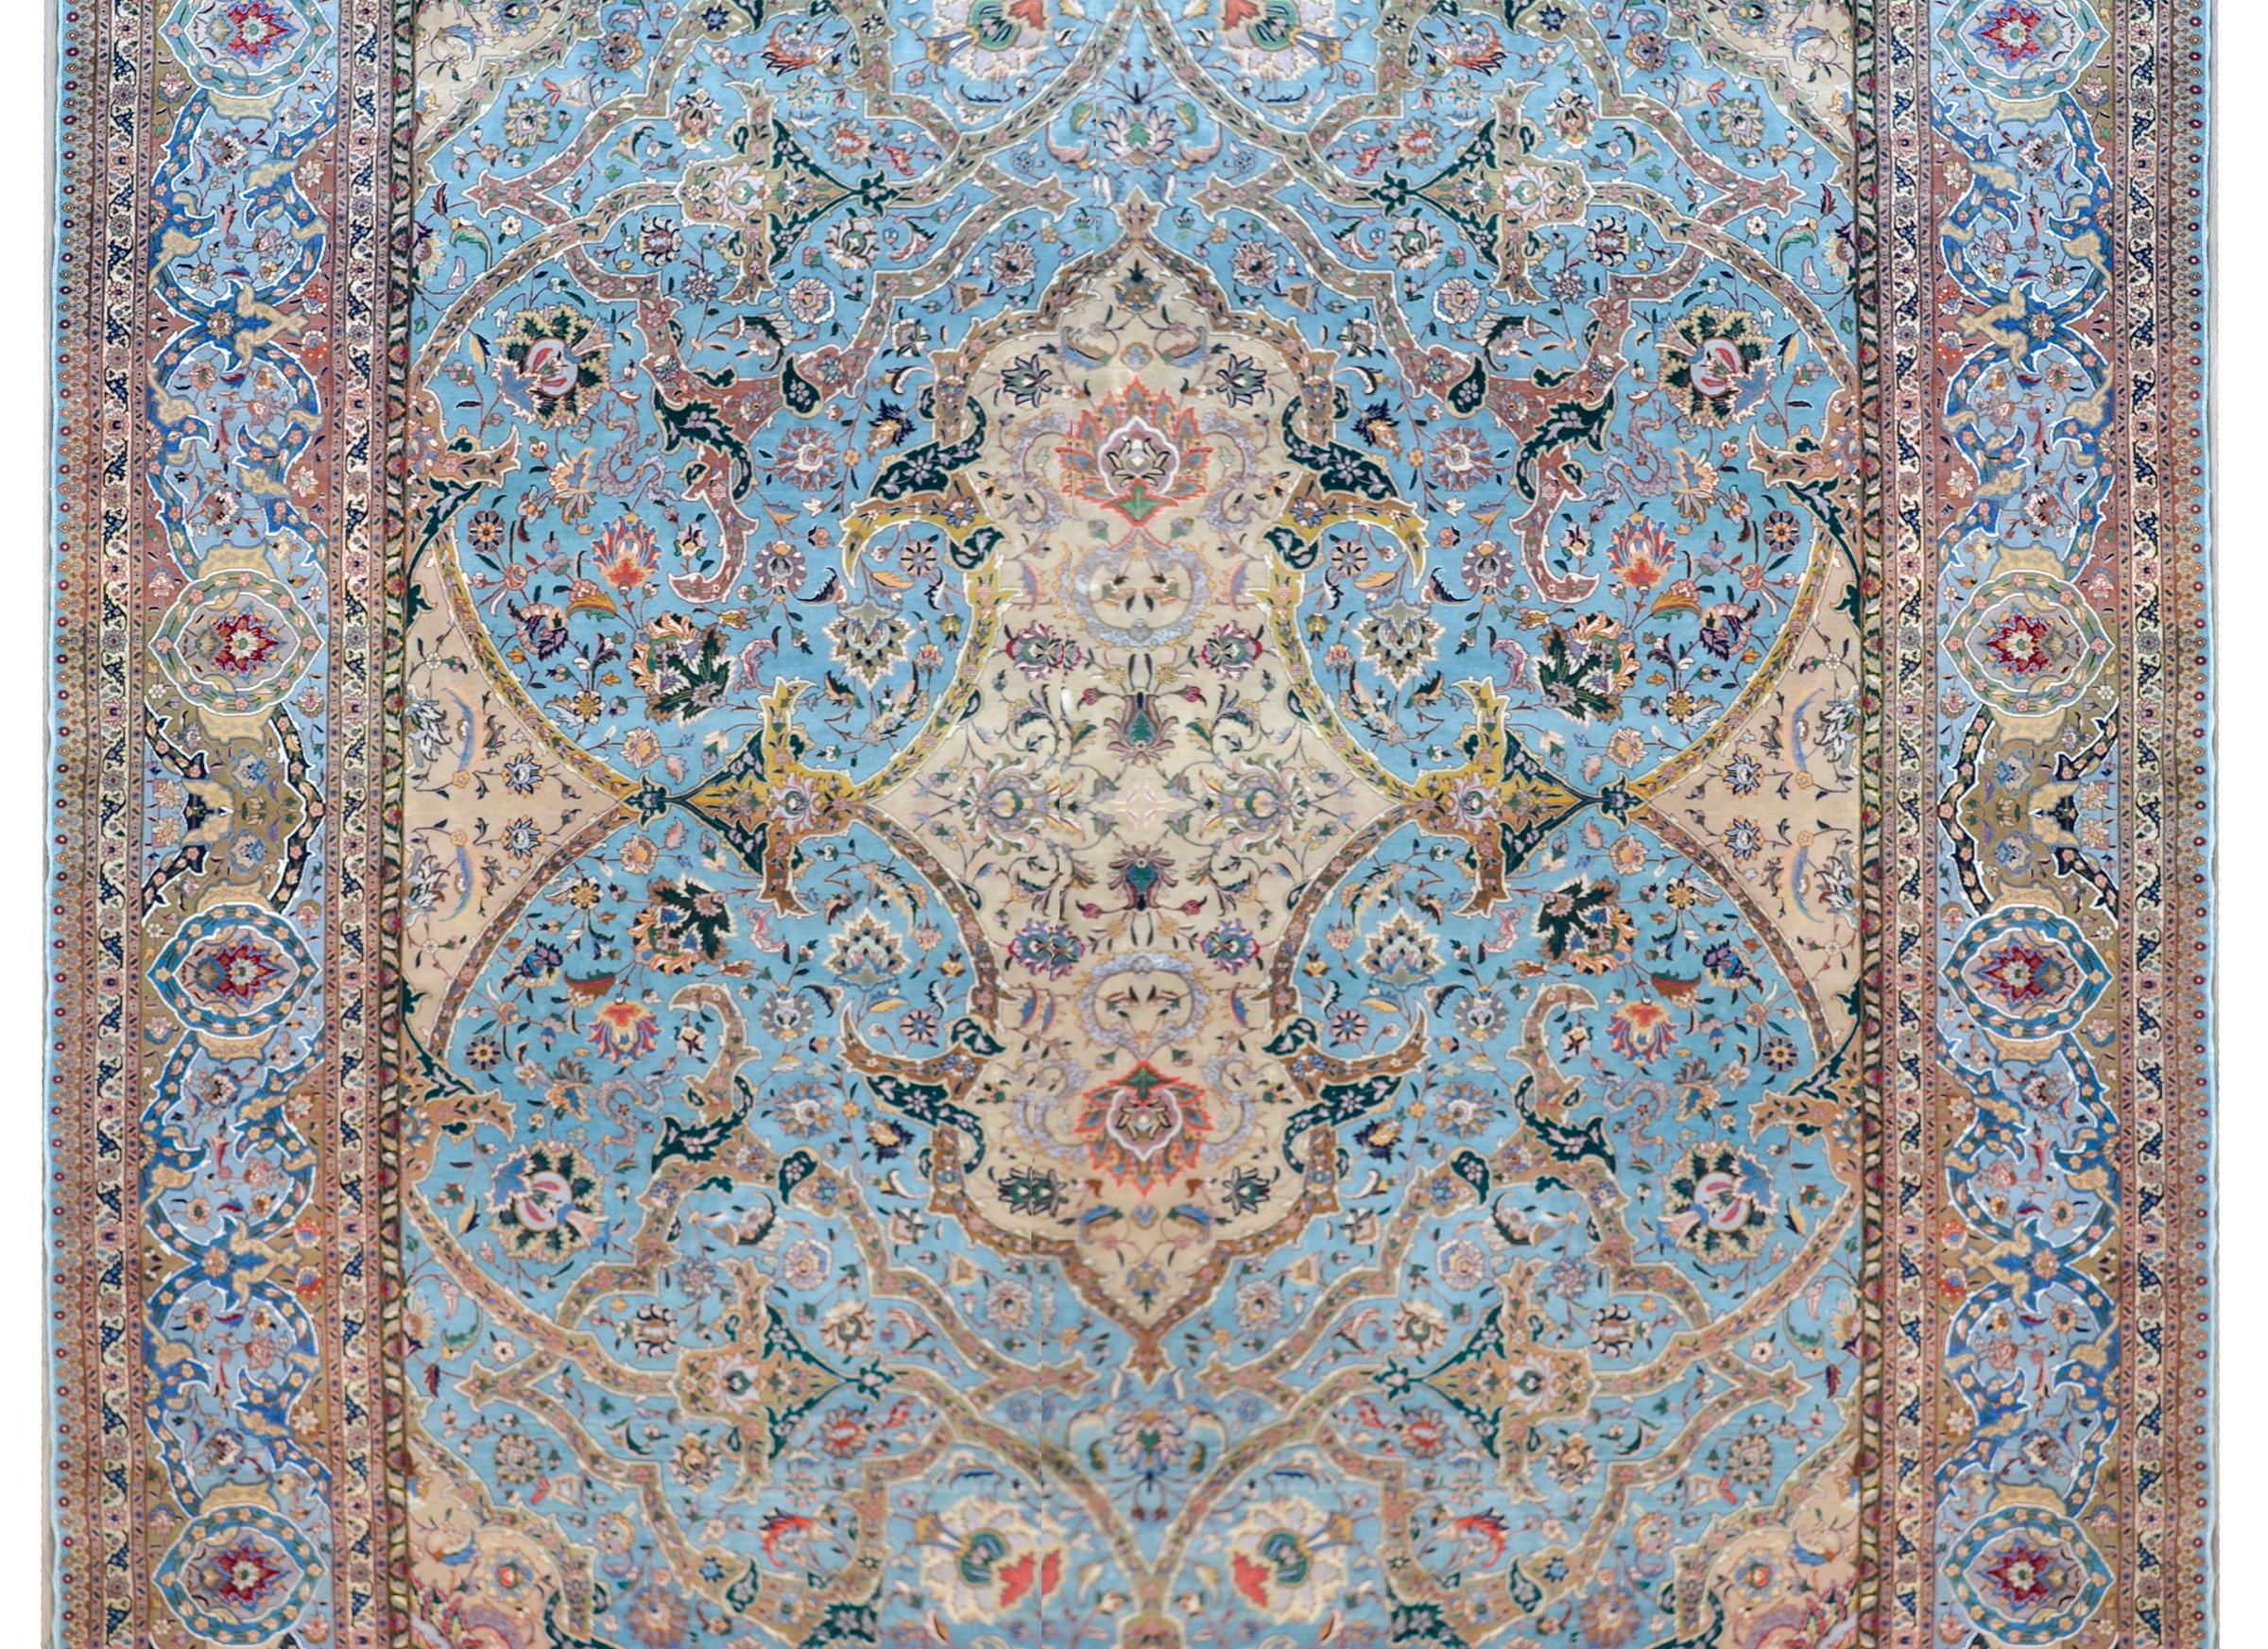 An incredible vintage Persian Tabriz rug with an unusual pattern containing a large central medallion with flowers woven in soft pastel colors set against a field of more flowers, and all set against a bright light indigo background. The border is